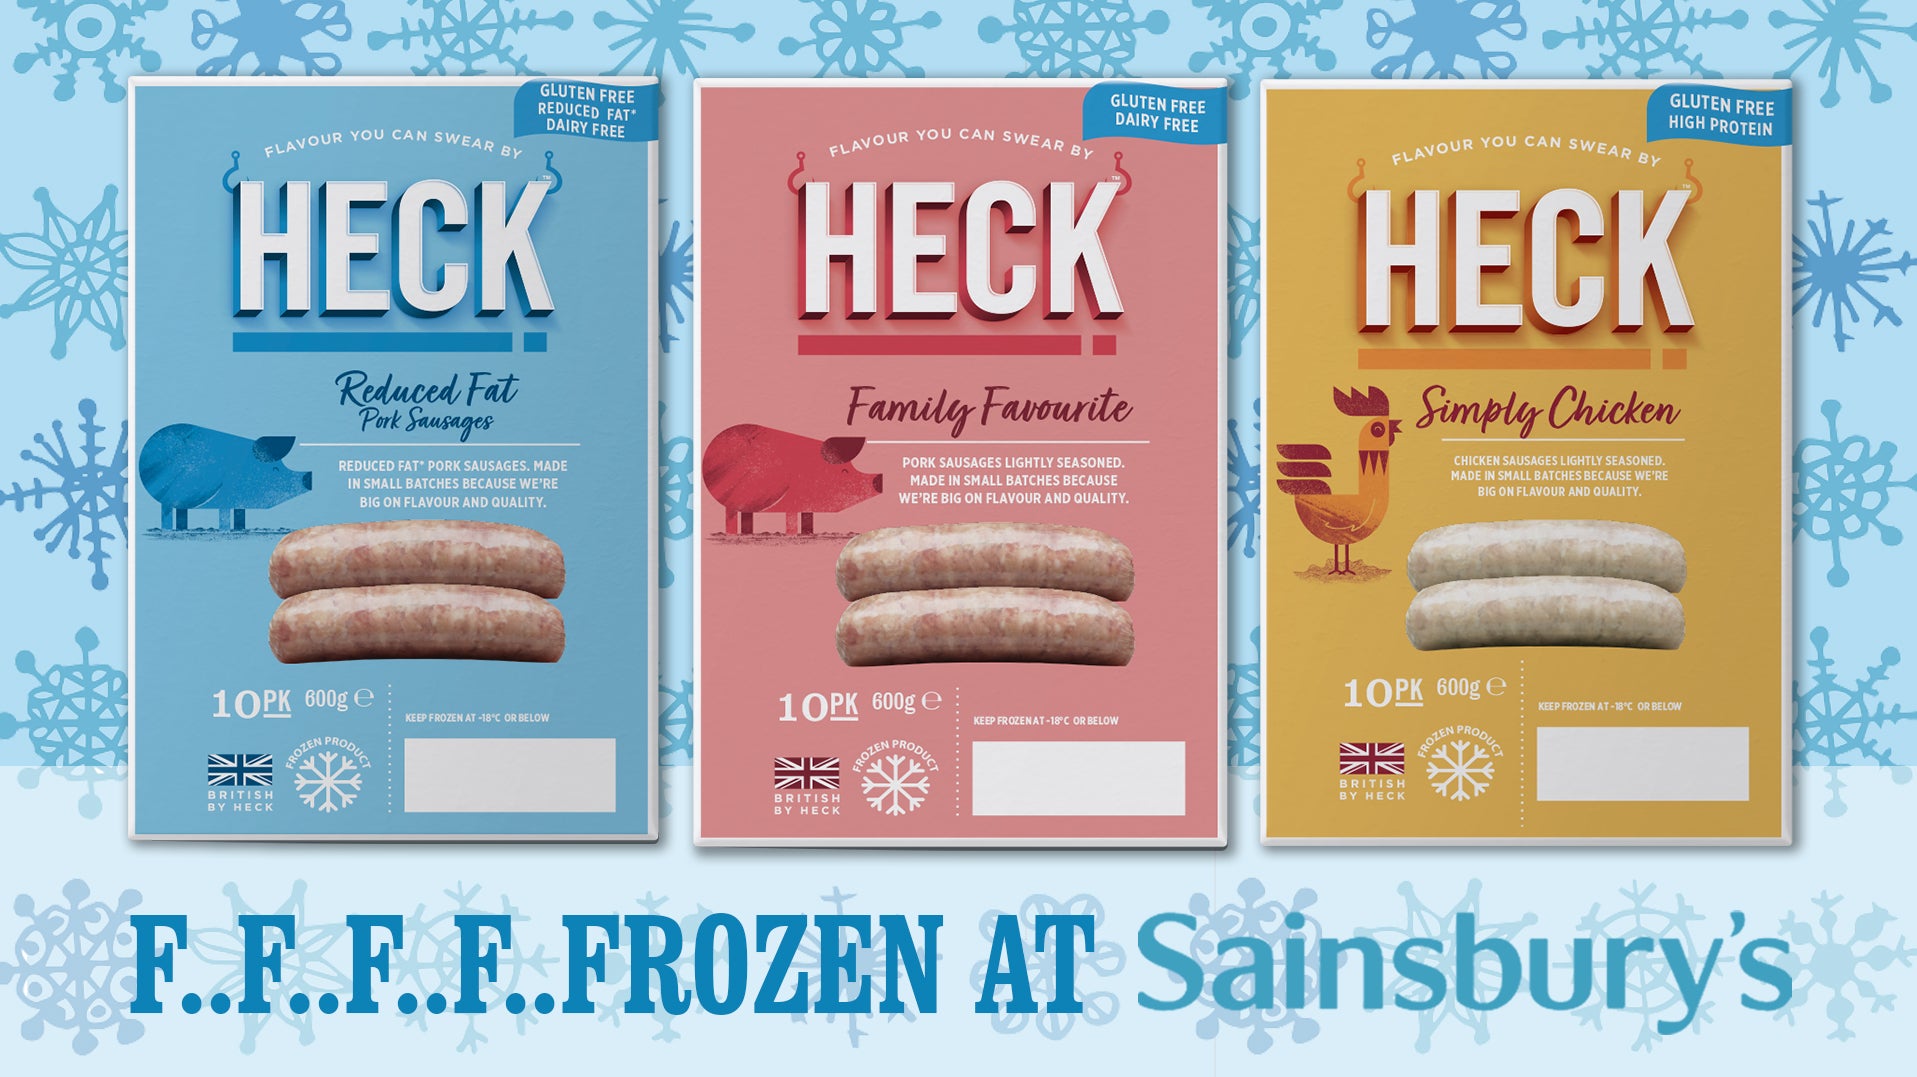 Check Out HECK F..F..F..F.. Frozen Meat Sausages At Sainsbury’s